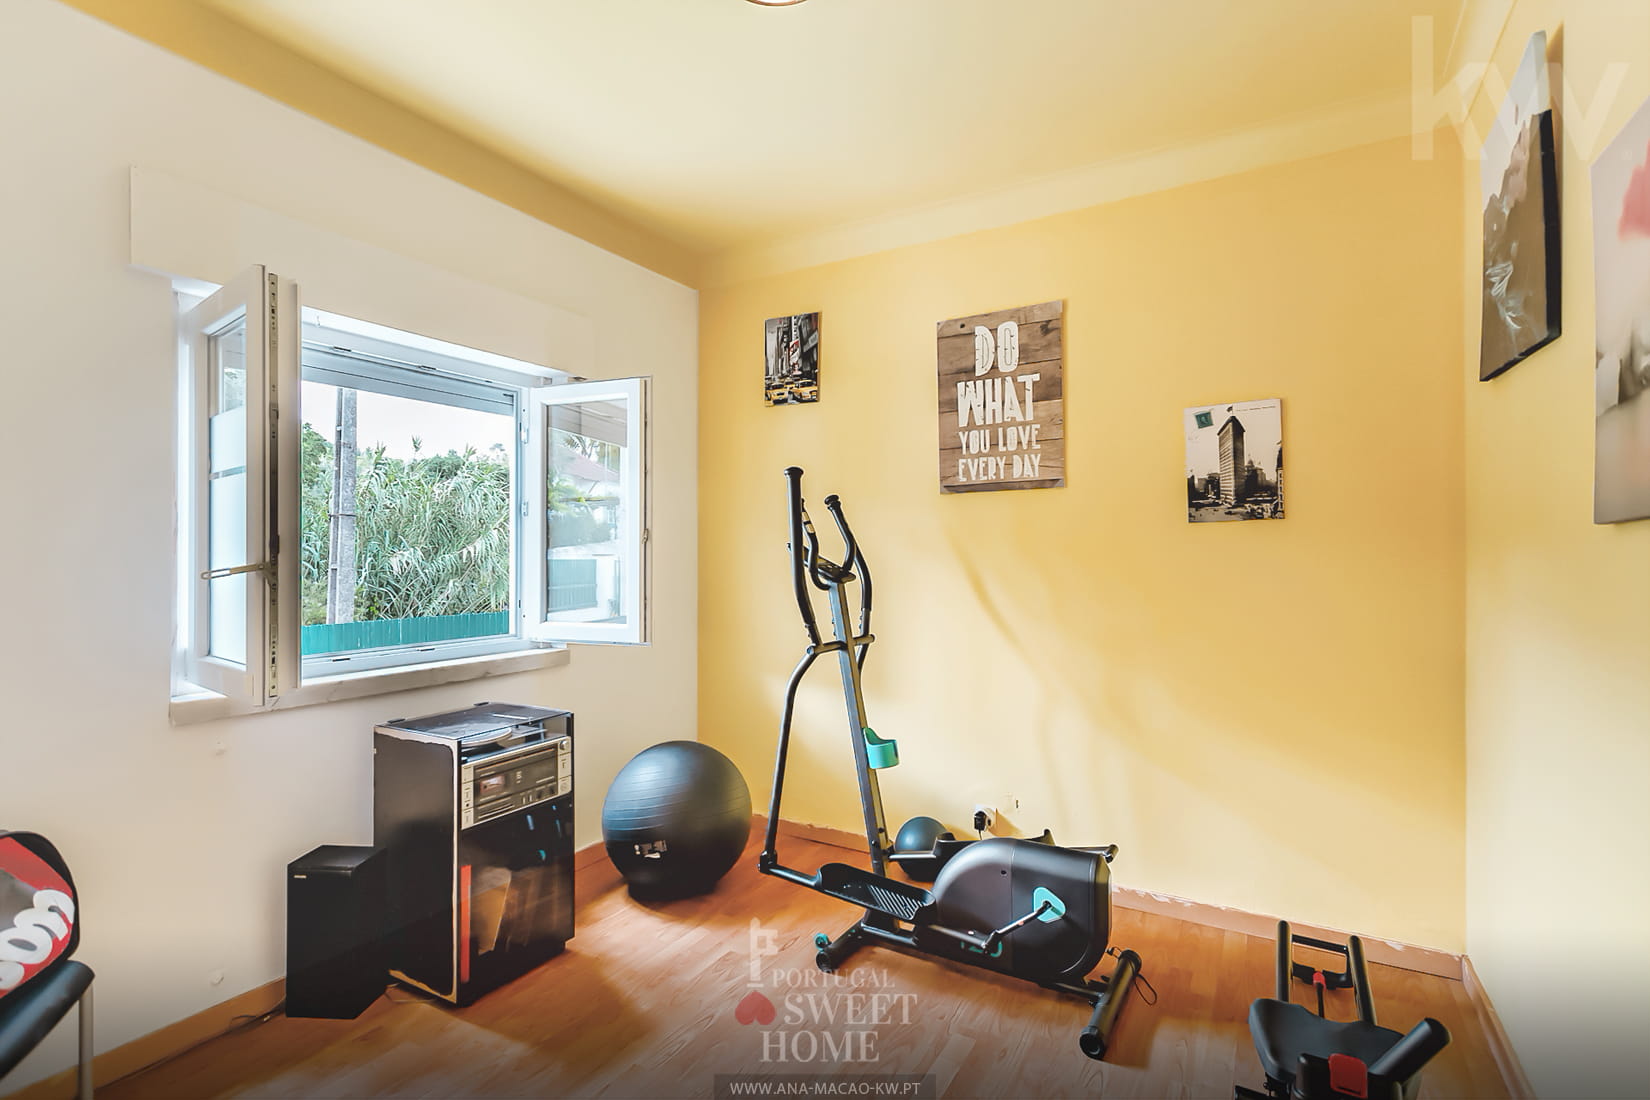 Room functioning as a gym